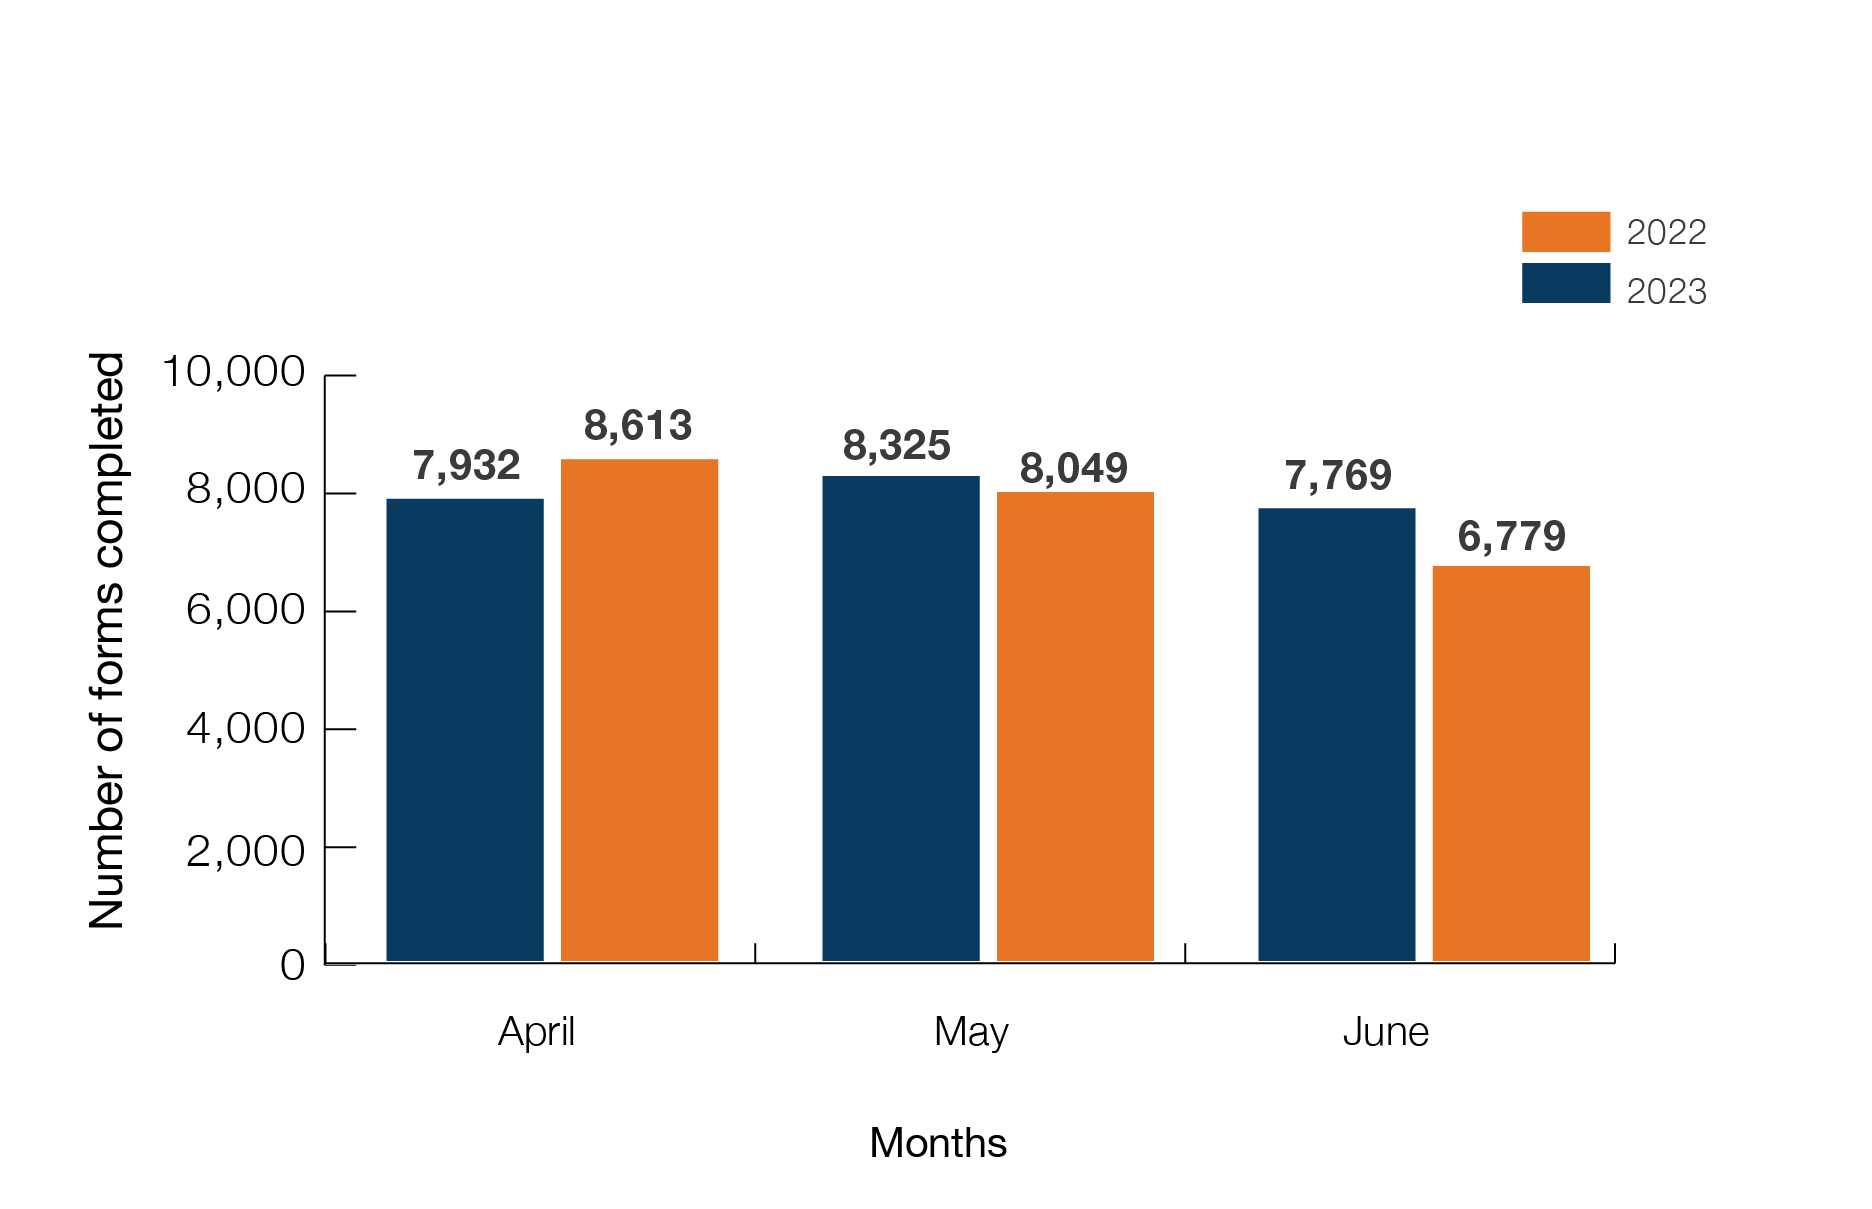 A graph showing the number of forms completed in April, May and June 2023 and comparing this with the number of forms completed in April, May and June 2022. In April 2023, 7932 forms were completed. In April 2022, 8613 forms were completed. In May 2023, 8,325 forms were completed. In May 2022, 8,049 forms were completed. In June 2023, 7,769 forms were completed. In June 2022, 6,779 forms were completed.